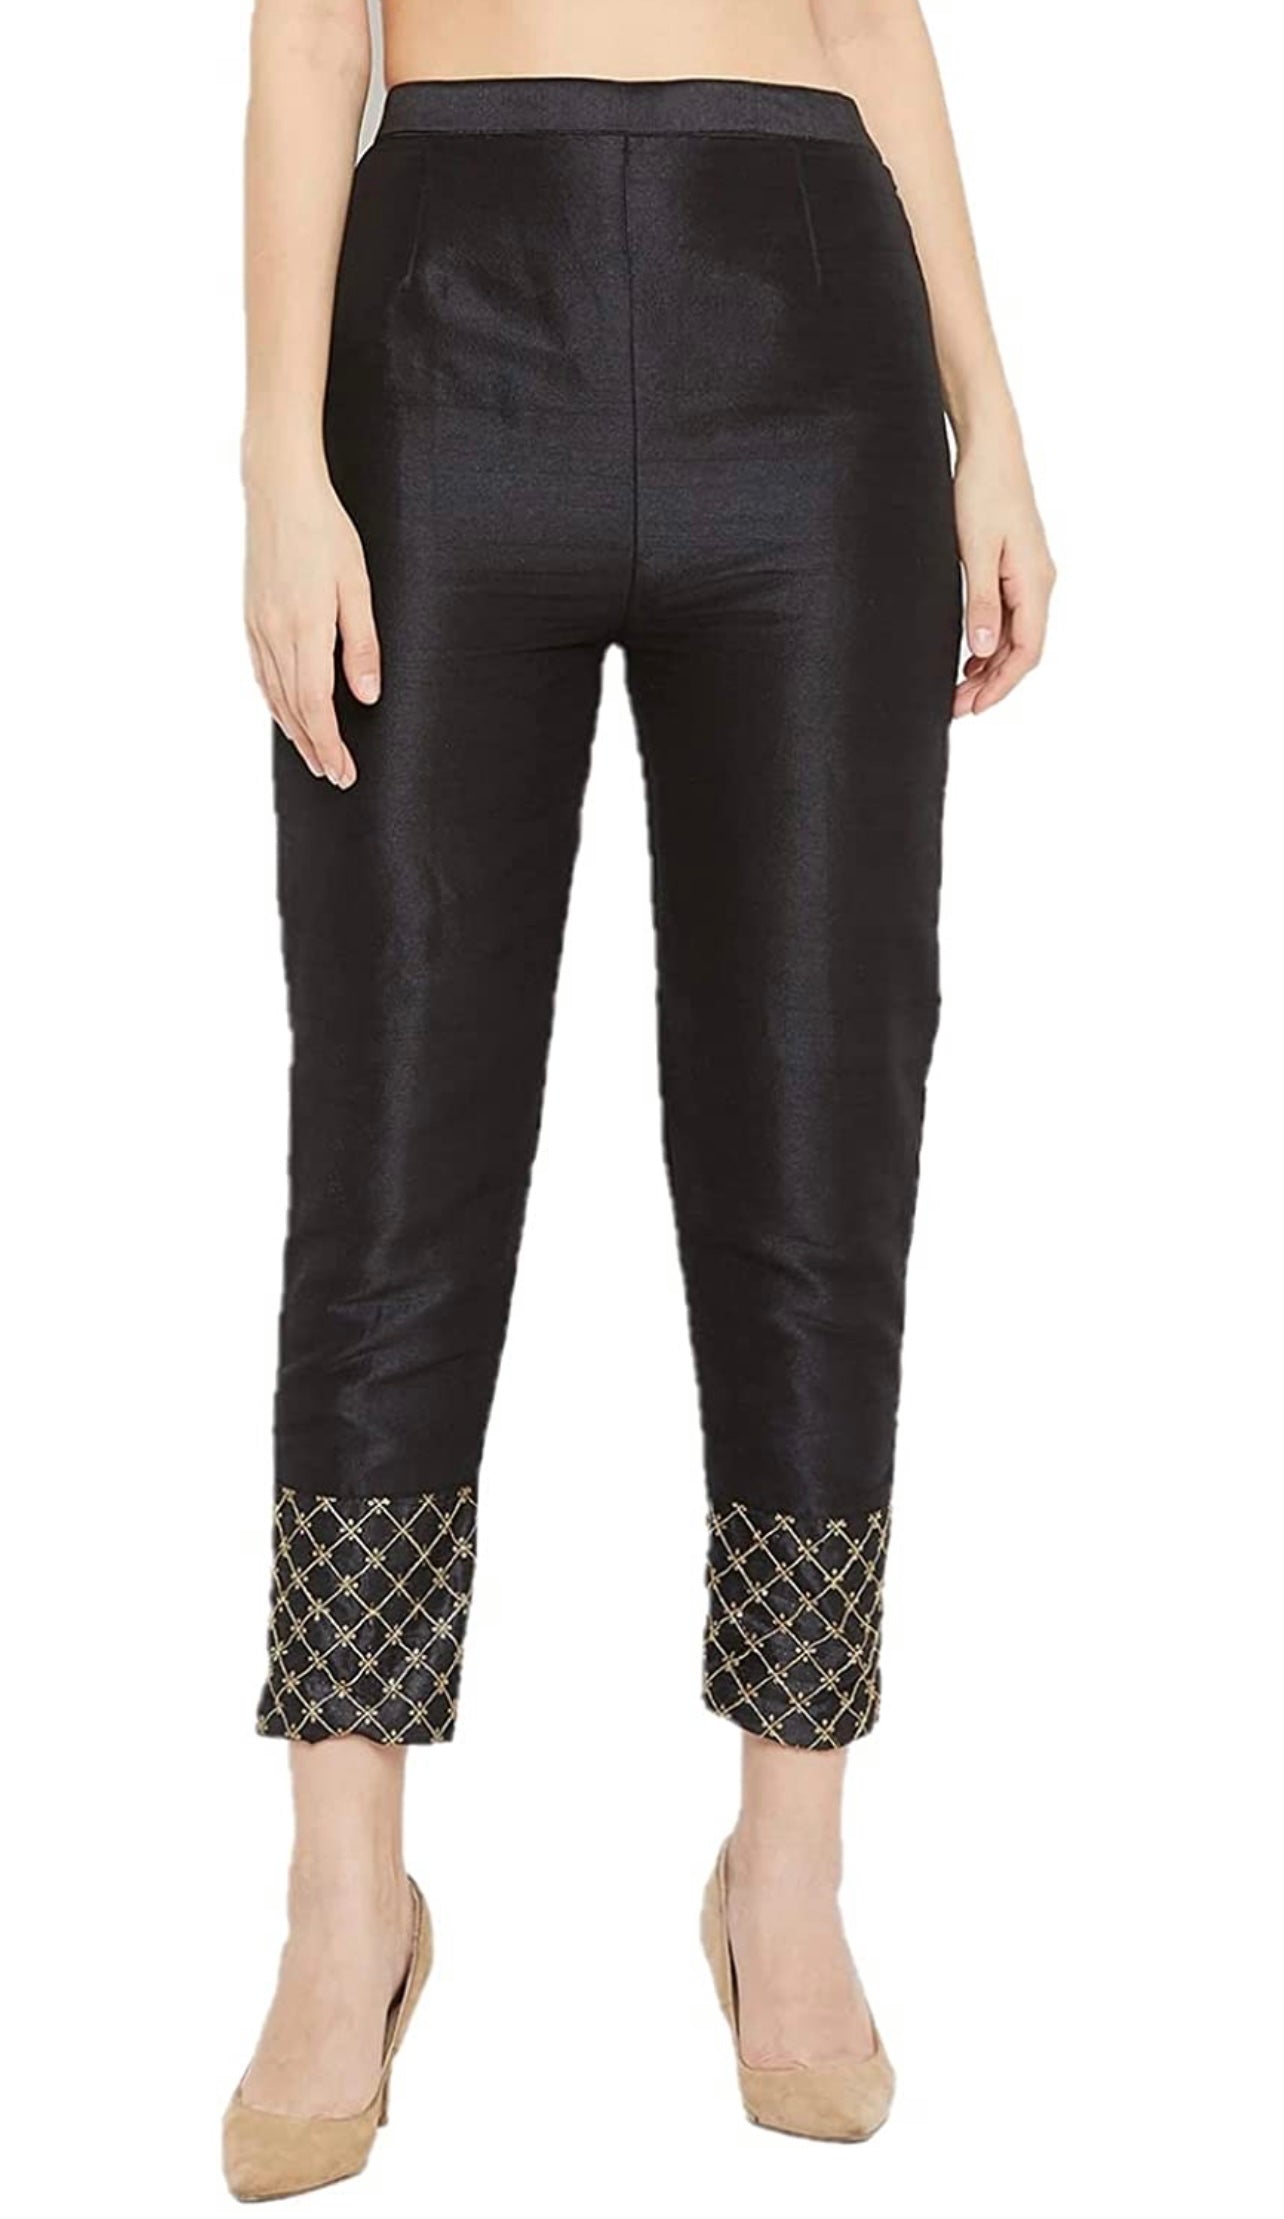 Black Cigarette Pants with Gold embroidery and sequin work